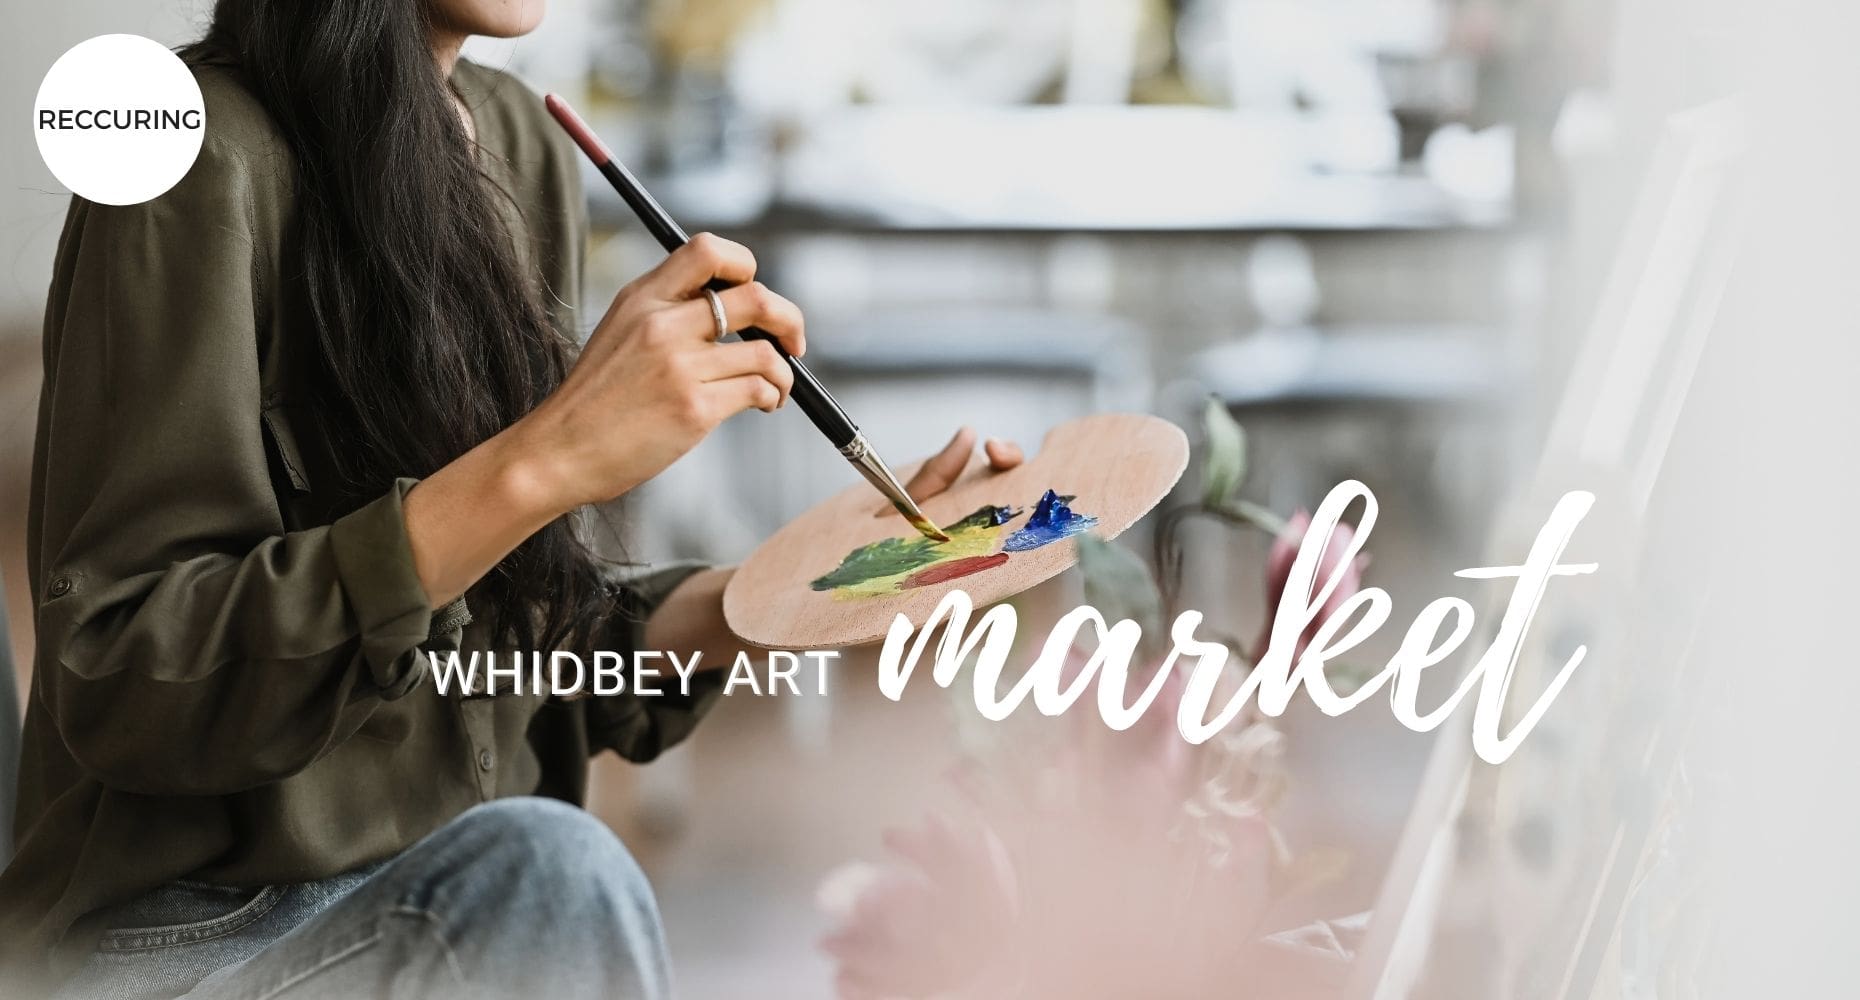 Whidbey Art Market, Whidbey Island, Windermere, Featured